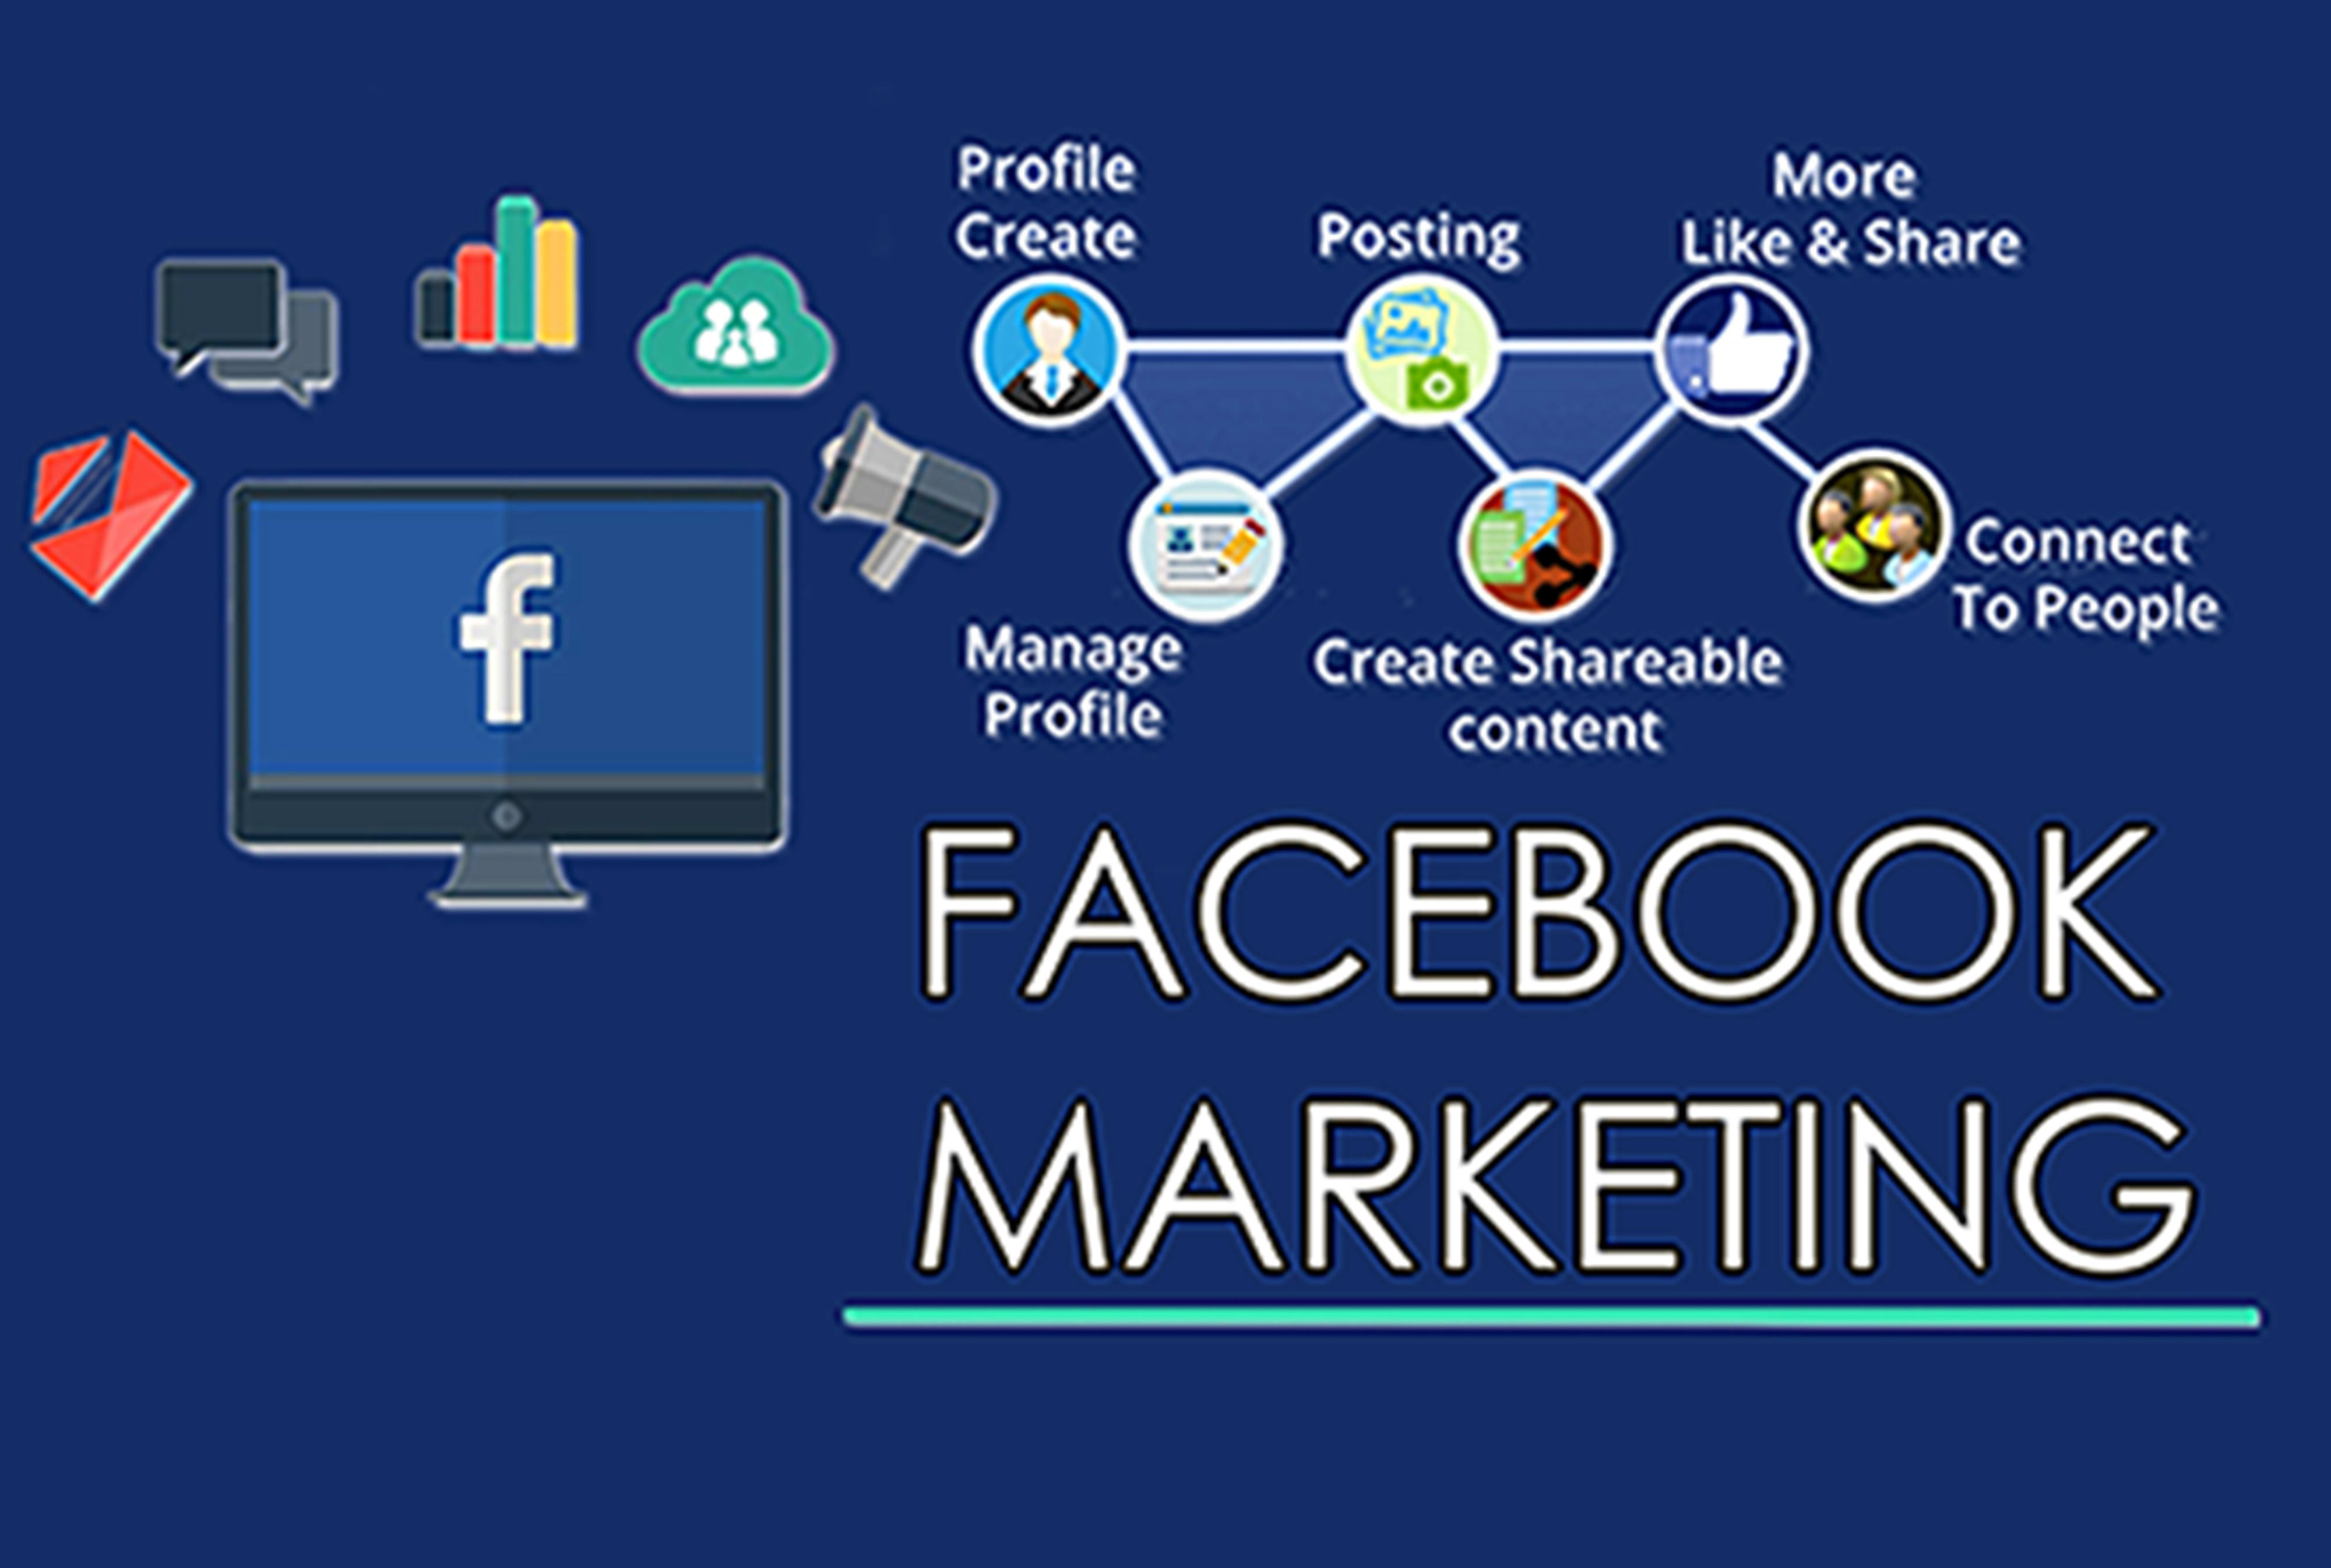 Improve Your Facebook Marketing With These 9 Key Tips (2022 Update)